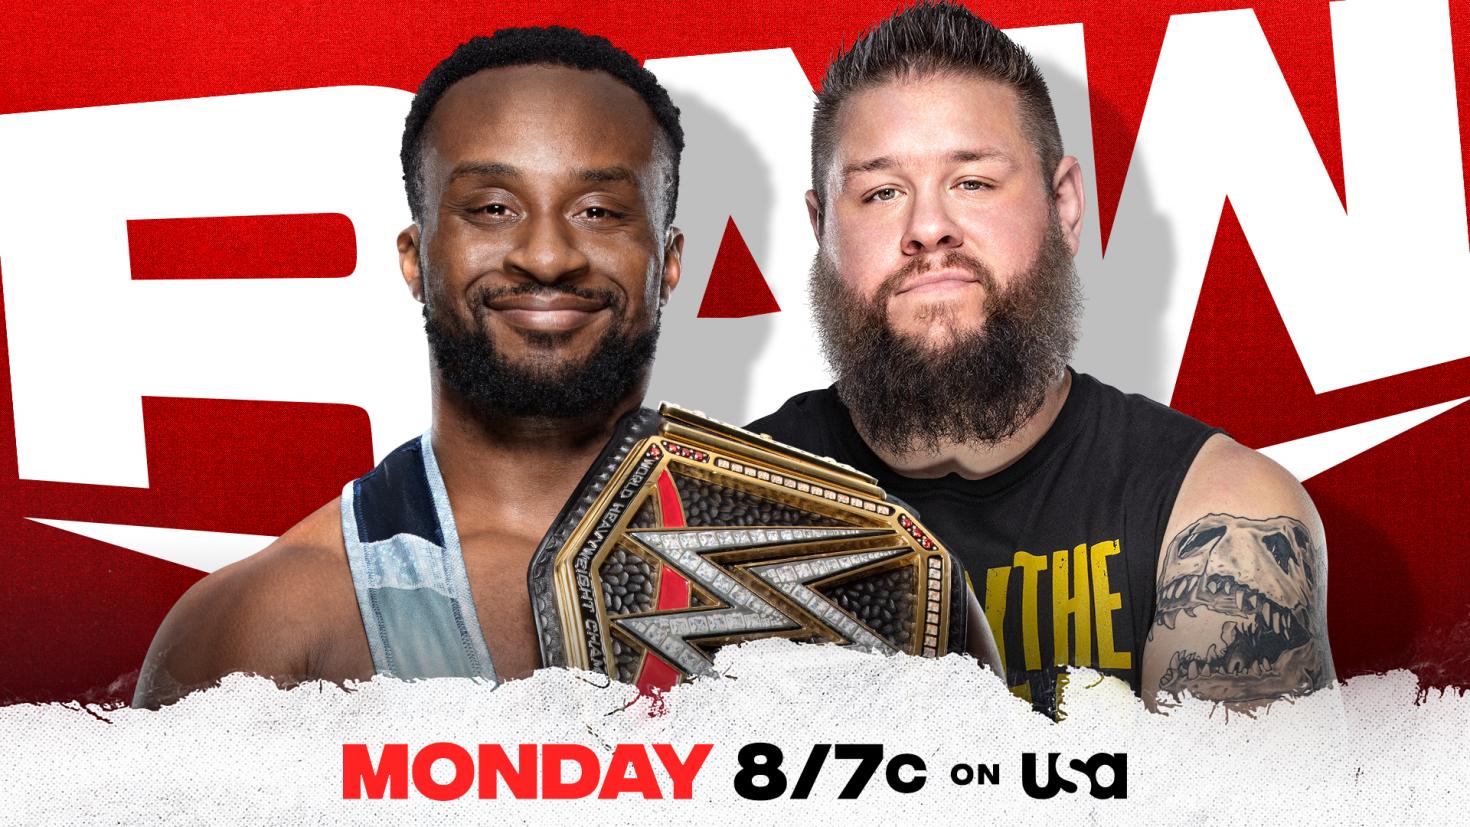 WWE RAW Results For November 29, 2021